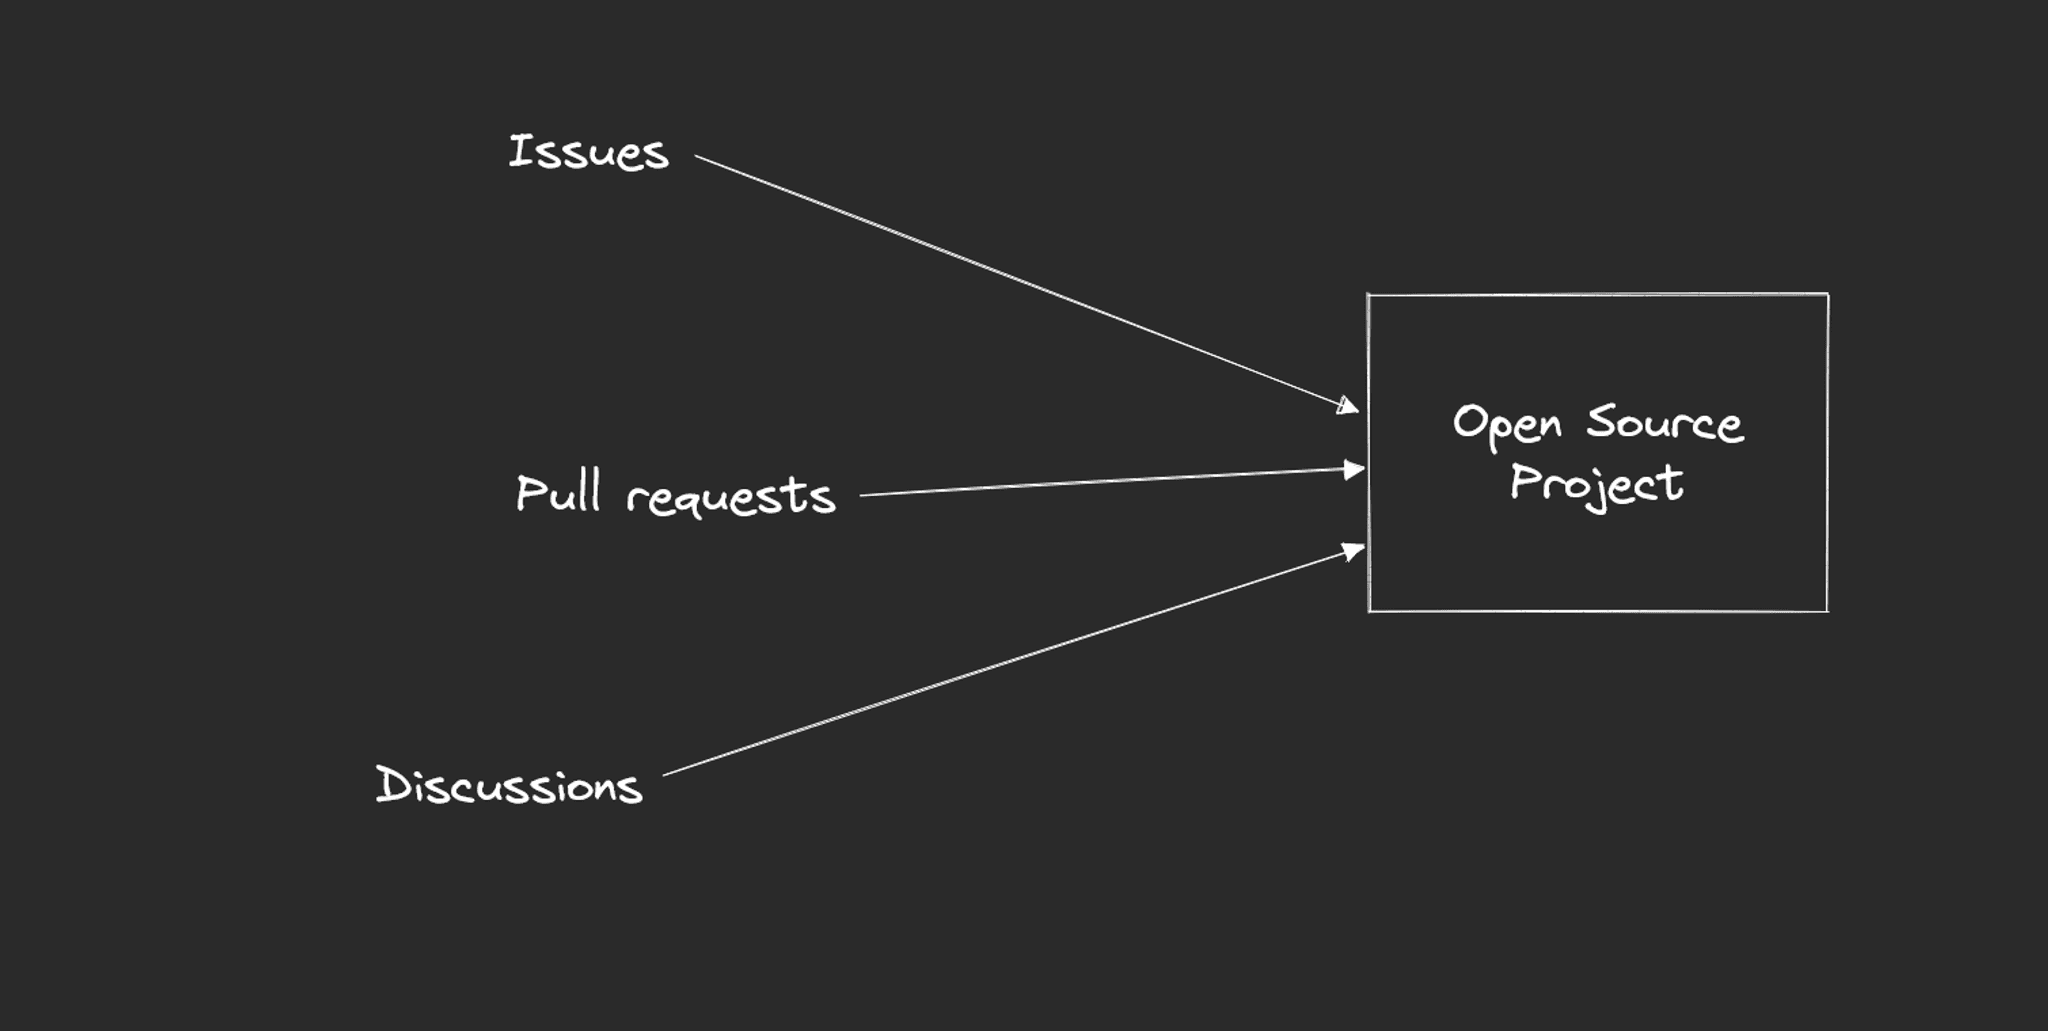 An image with 3 texts, Issues, Pull Requests, Discussions, each linked with an arrow towards a Repository.